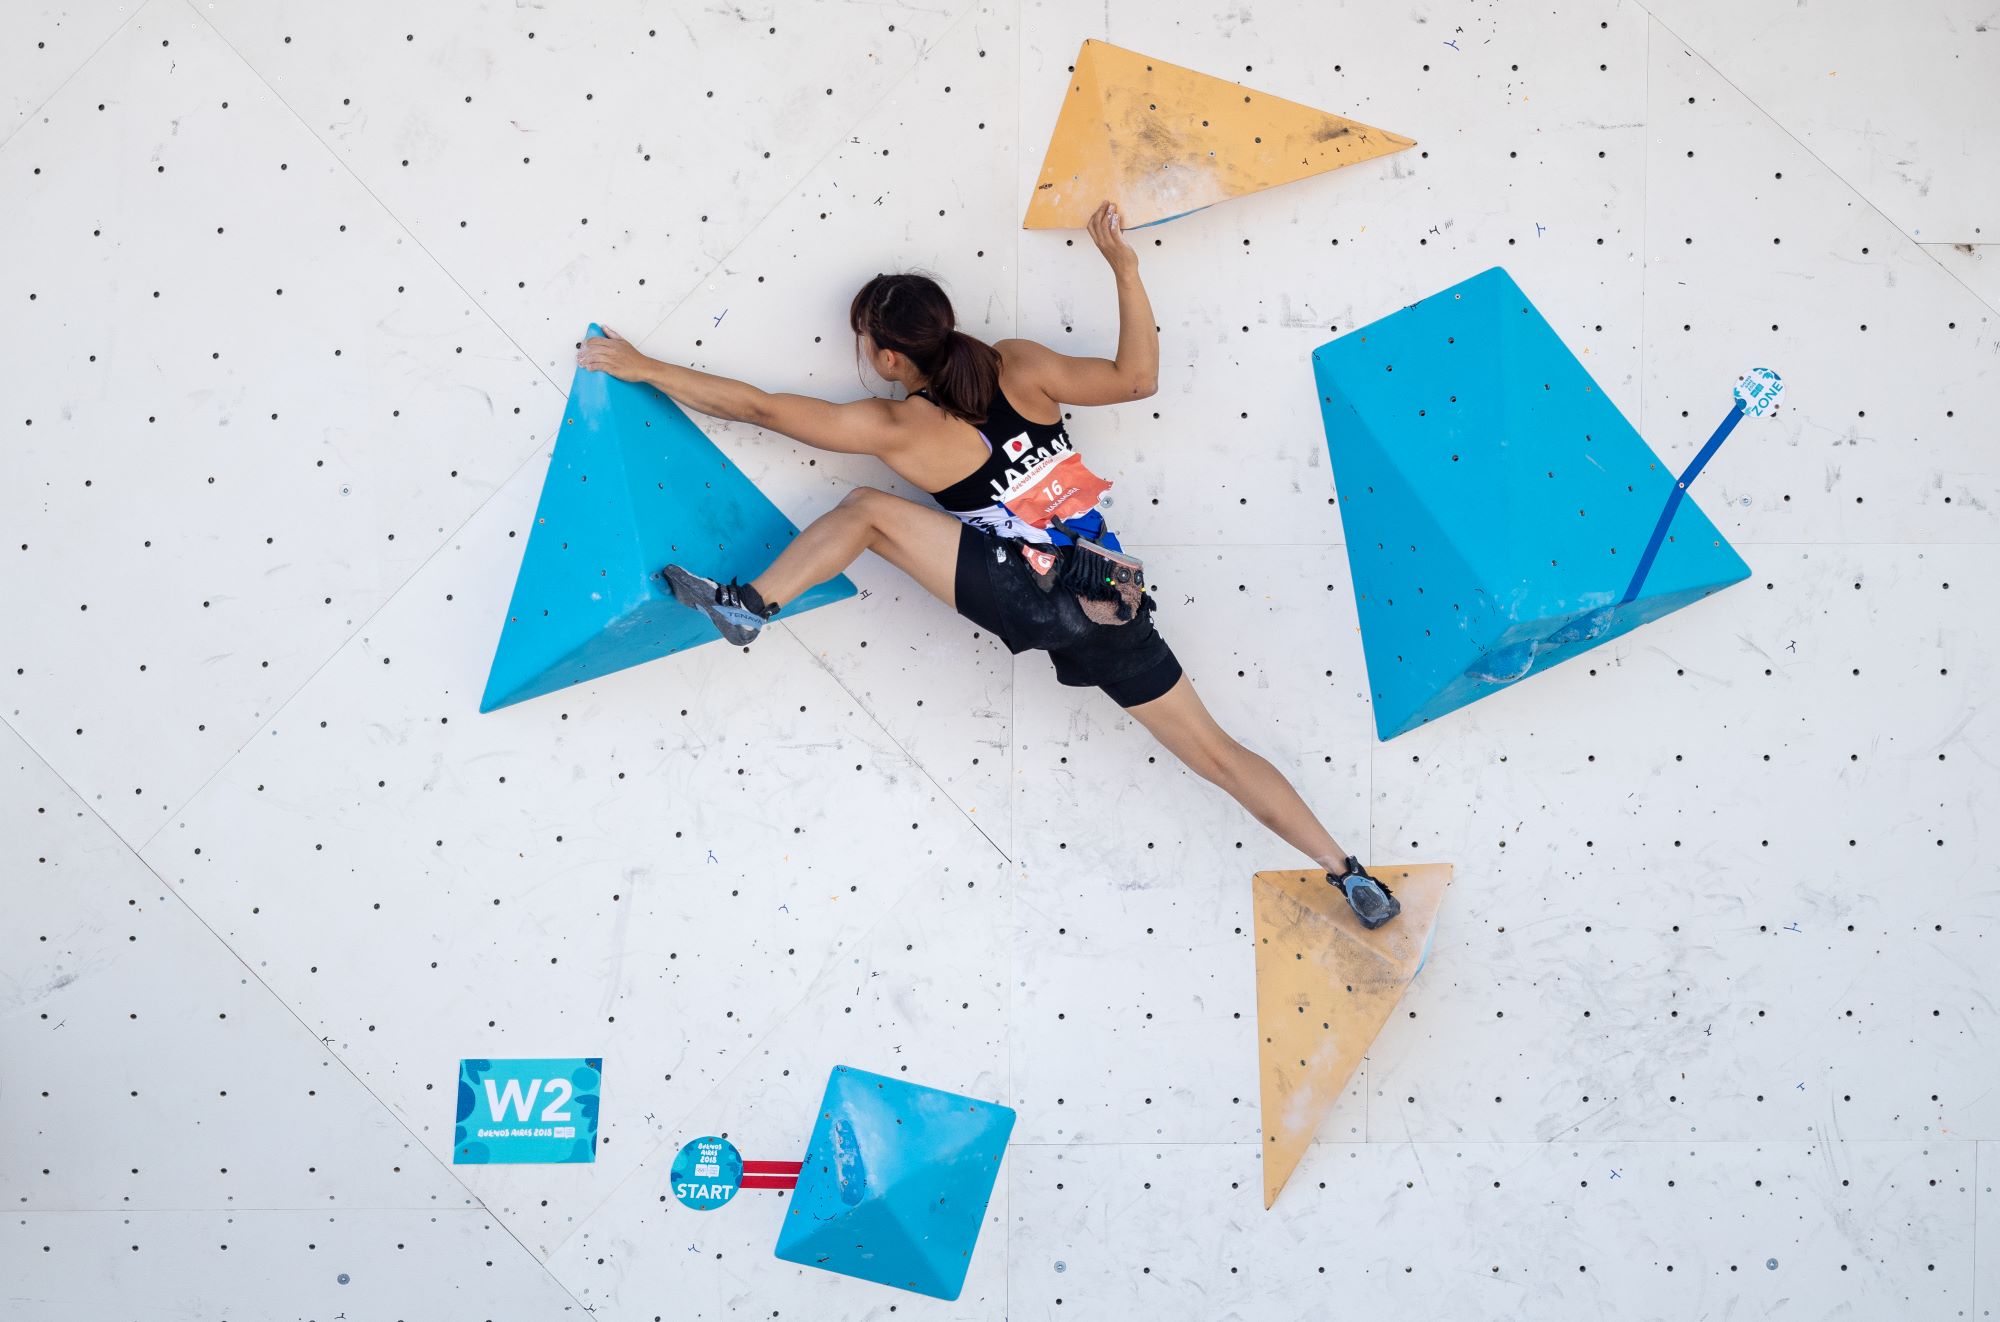 Sport Climbing at the Paris 2024 Olympic Games